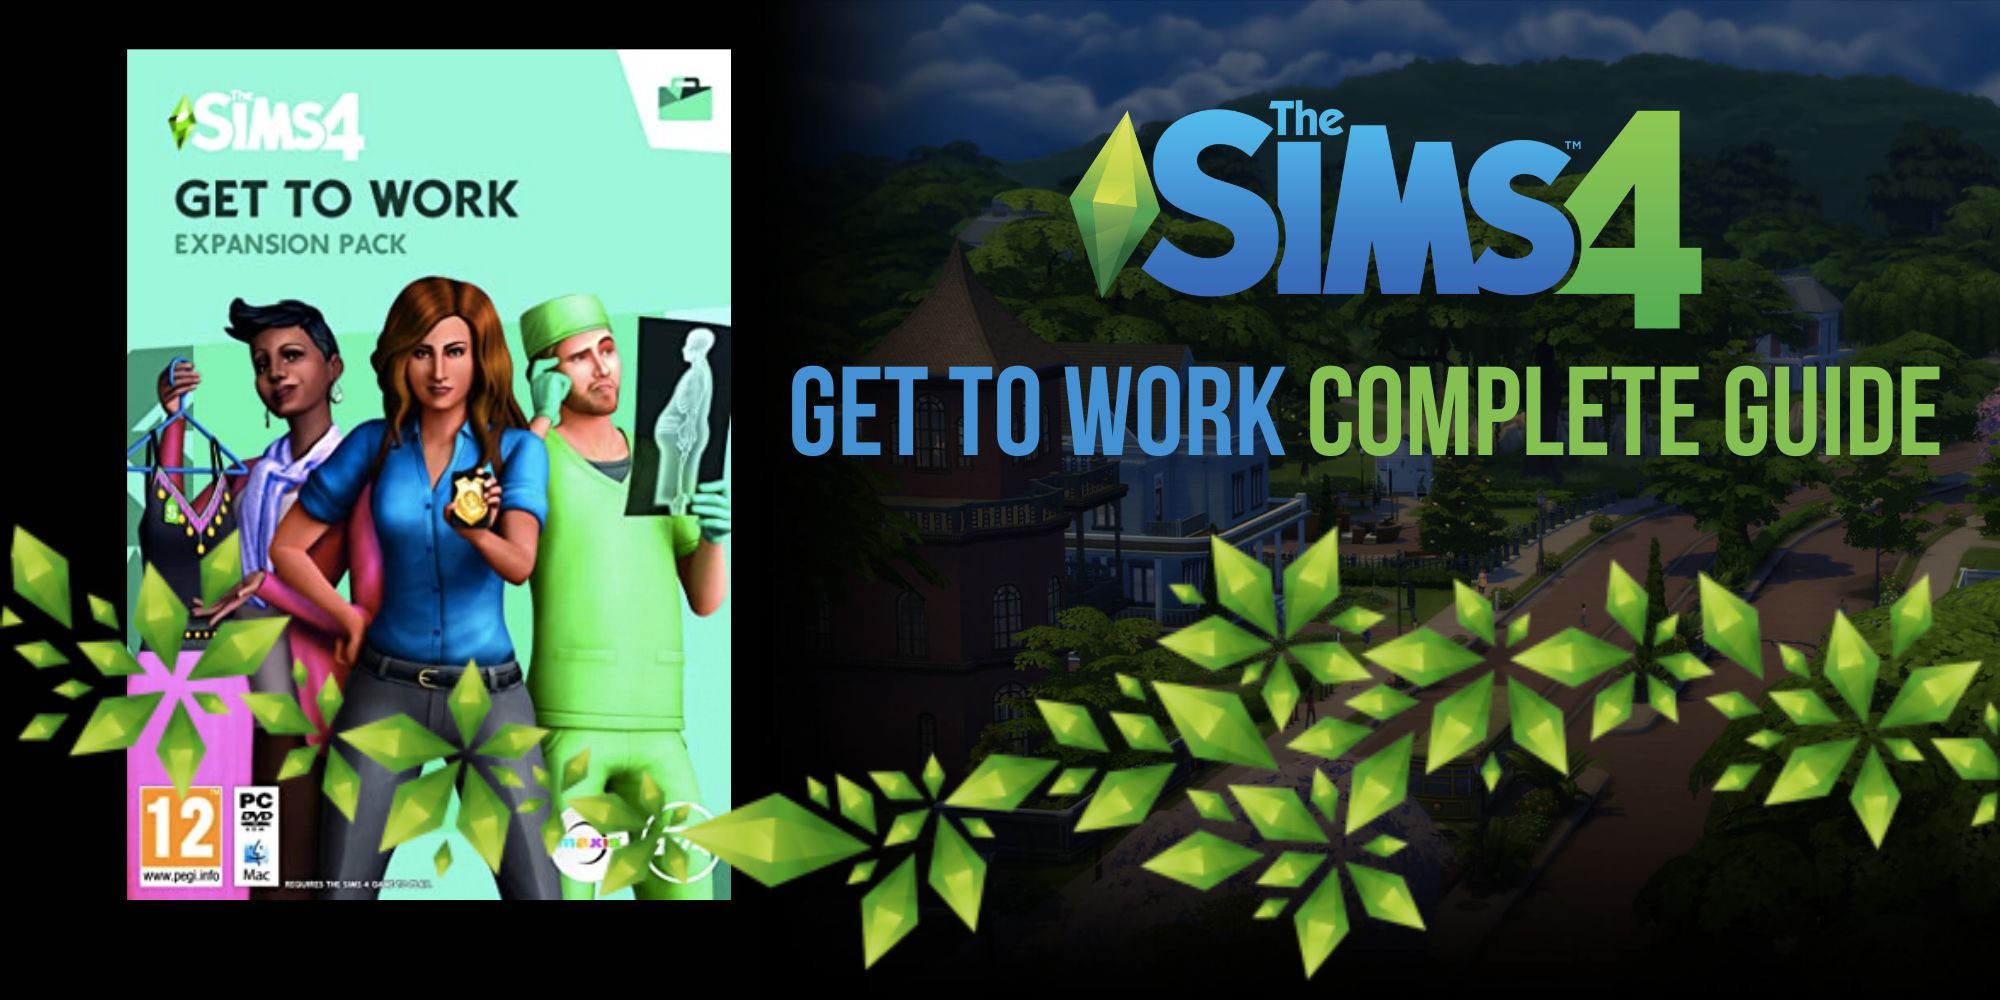 The Sims 4 Get to Work Full Guide